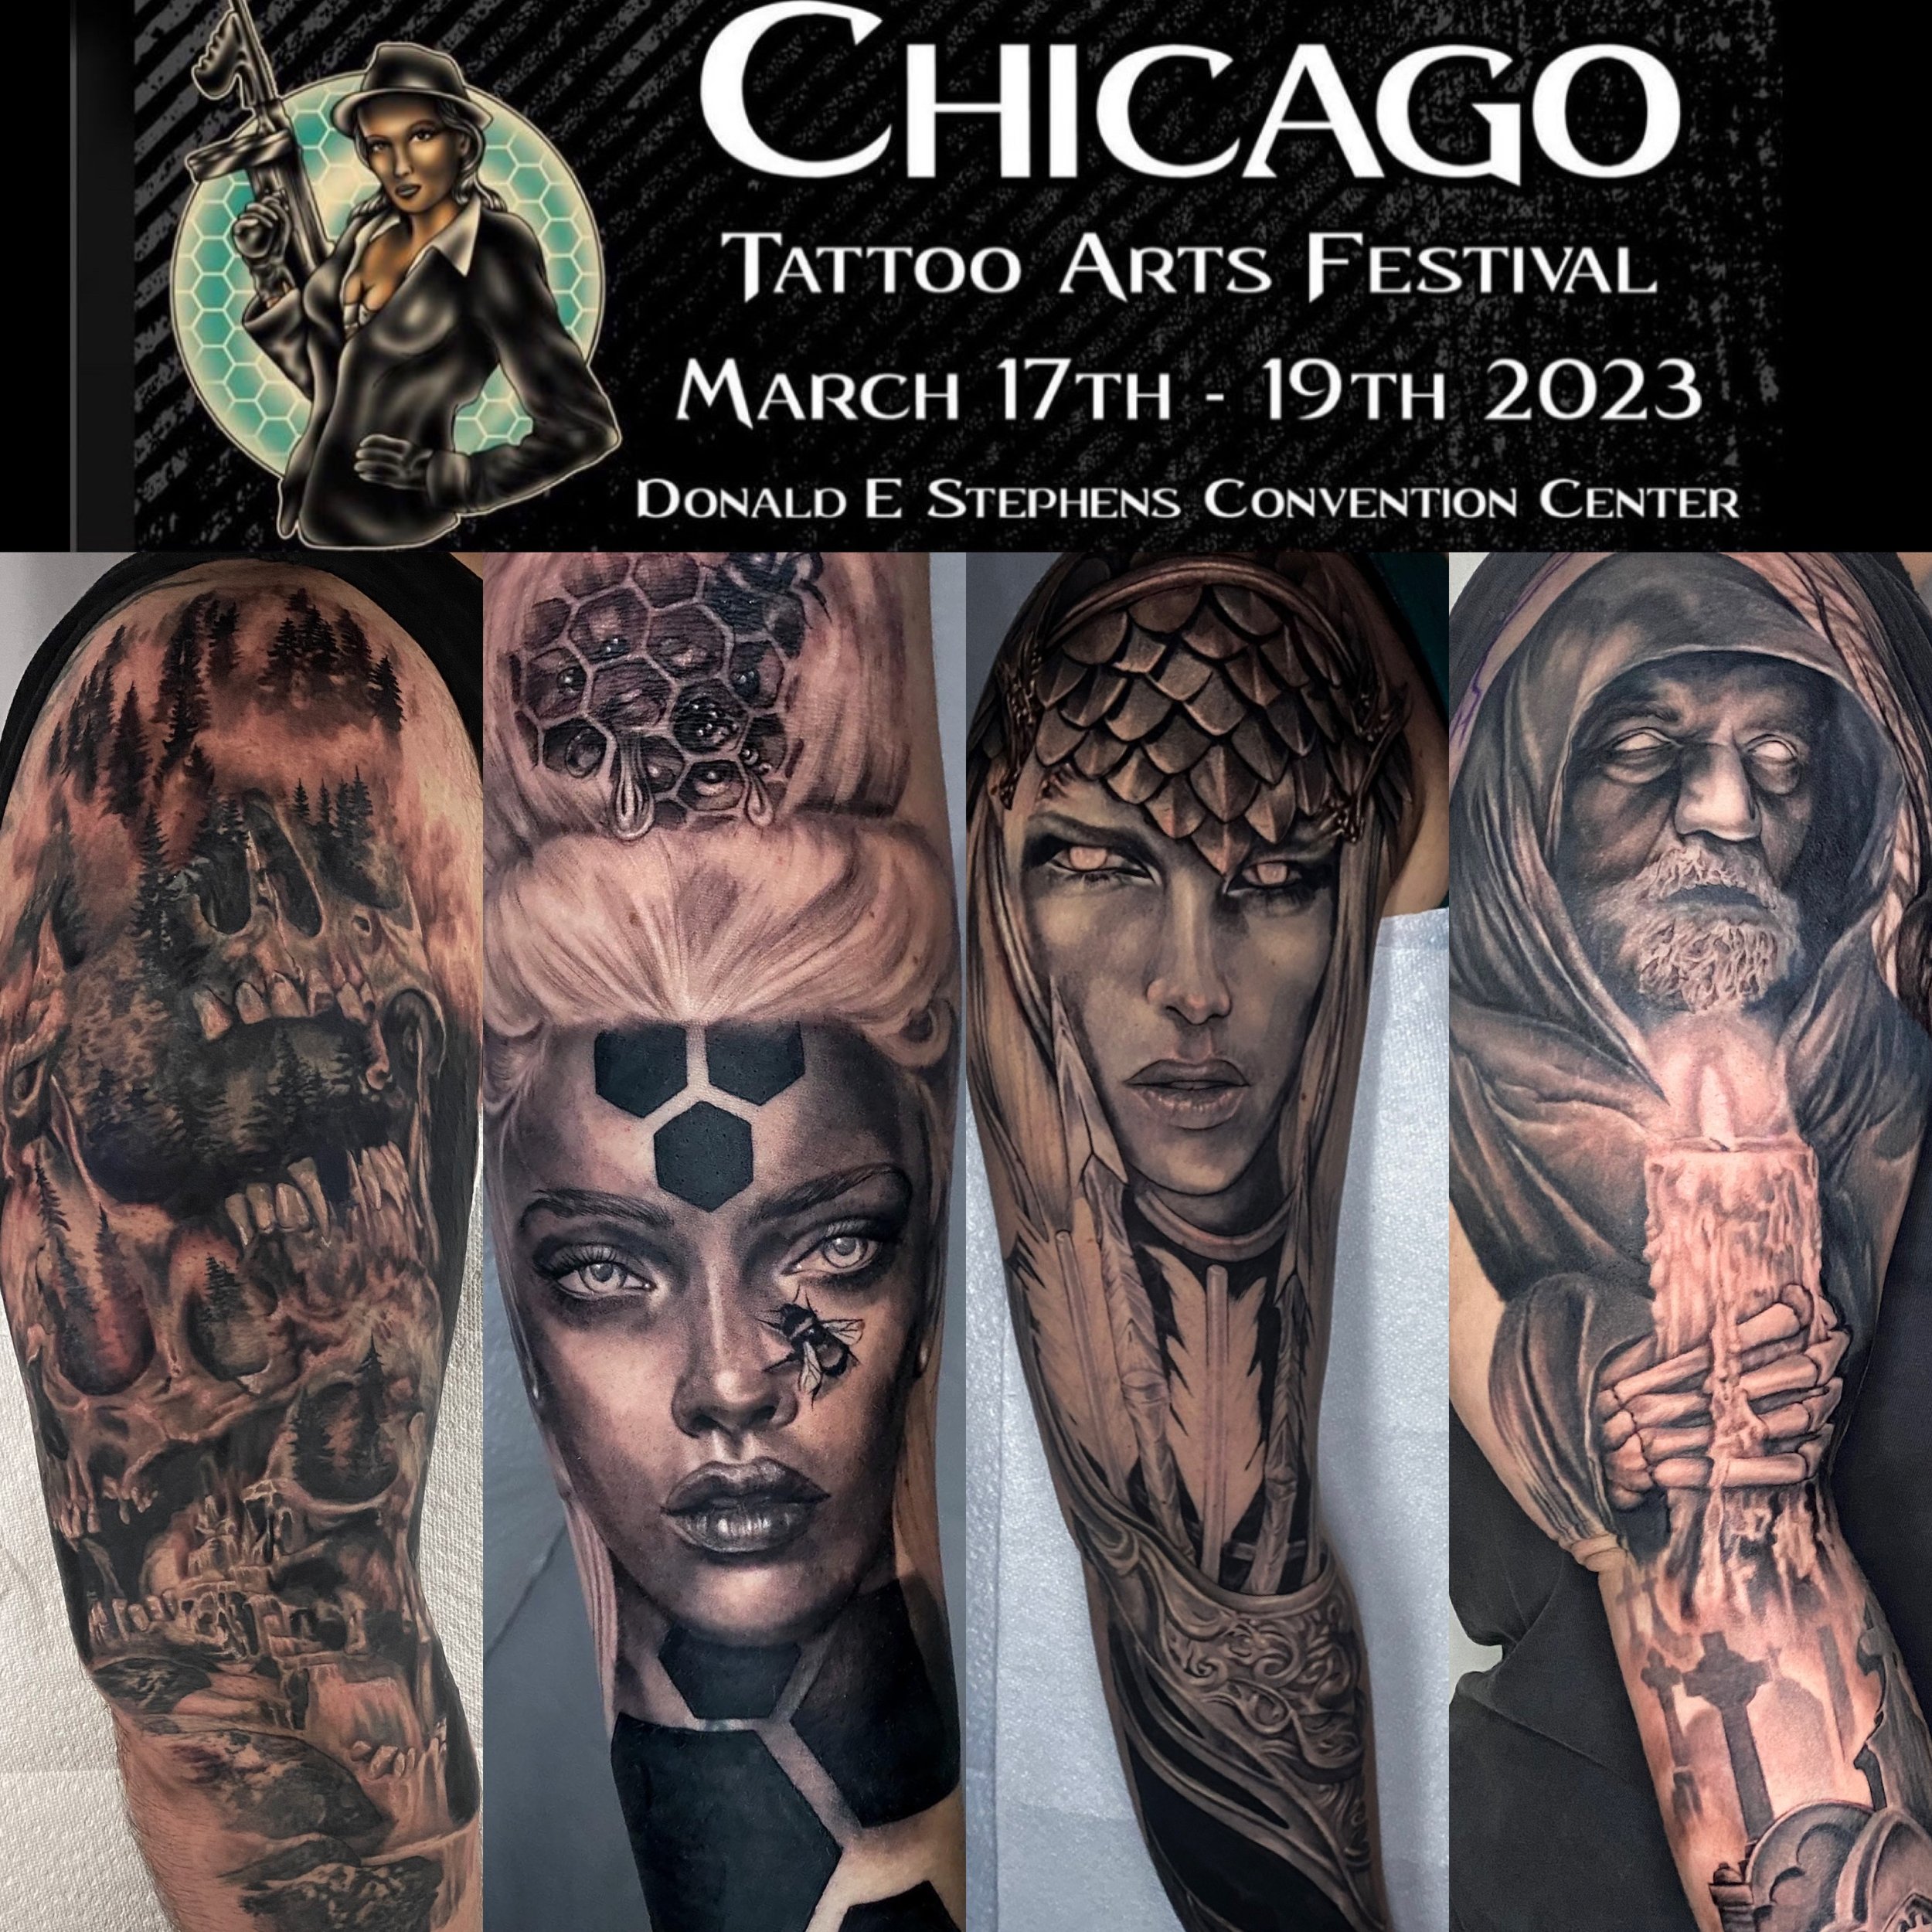 Holy Trinity Tattoo Studio  Would you like to be tattooed by Anastasiya at  villainarts Chicago Tattoo Convention Please email  Holytrinitytattoosgmailcom  to discuss your ideas An opportunity not  to be missed 